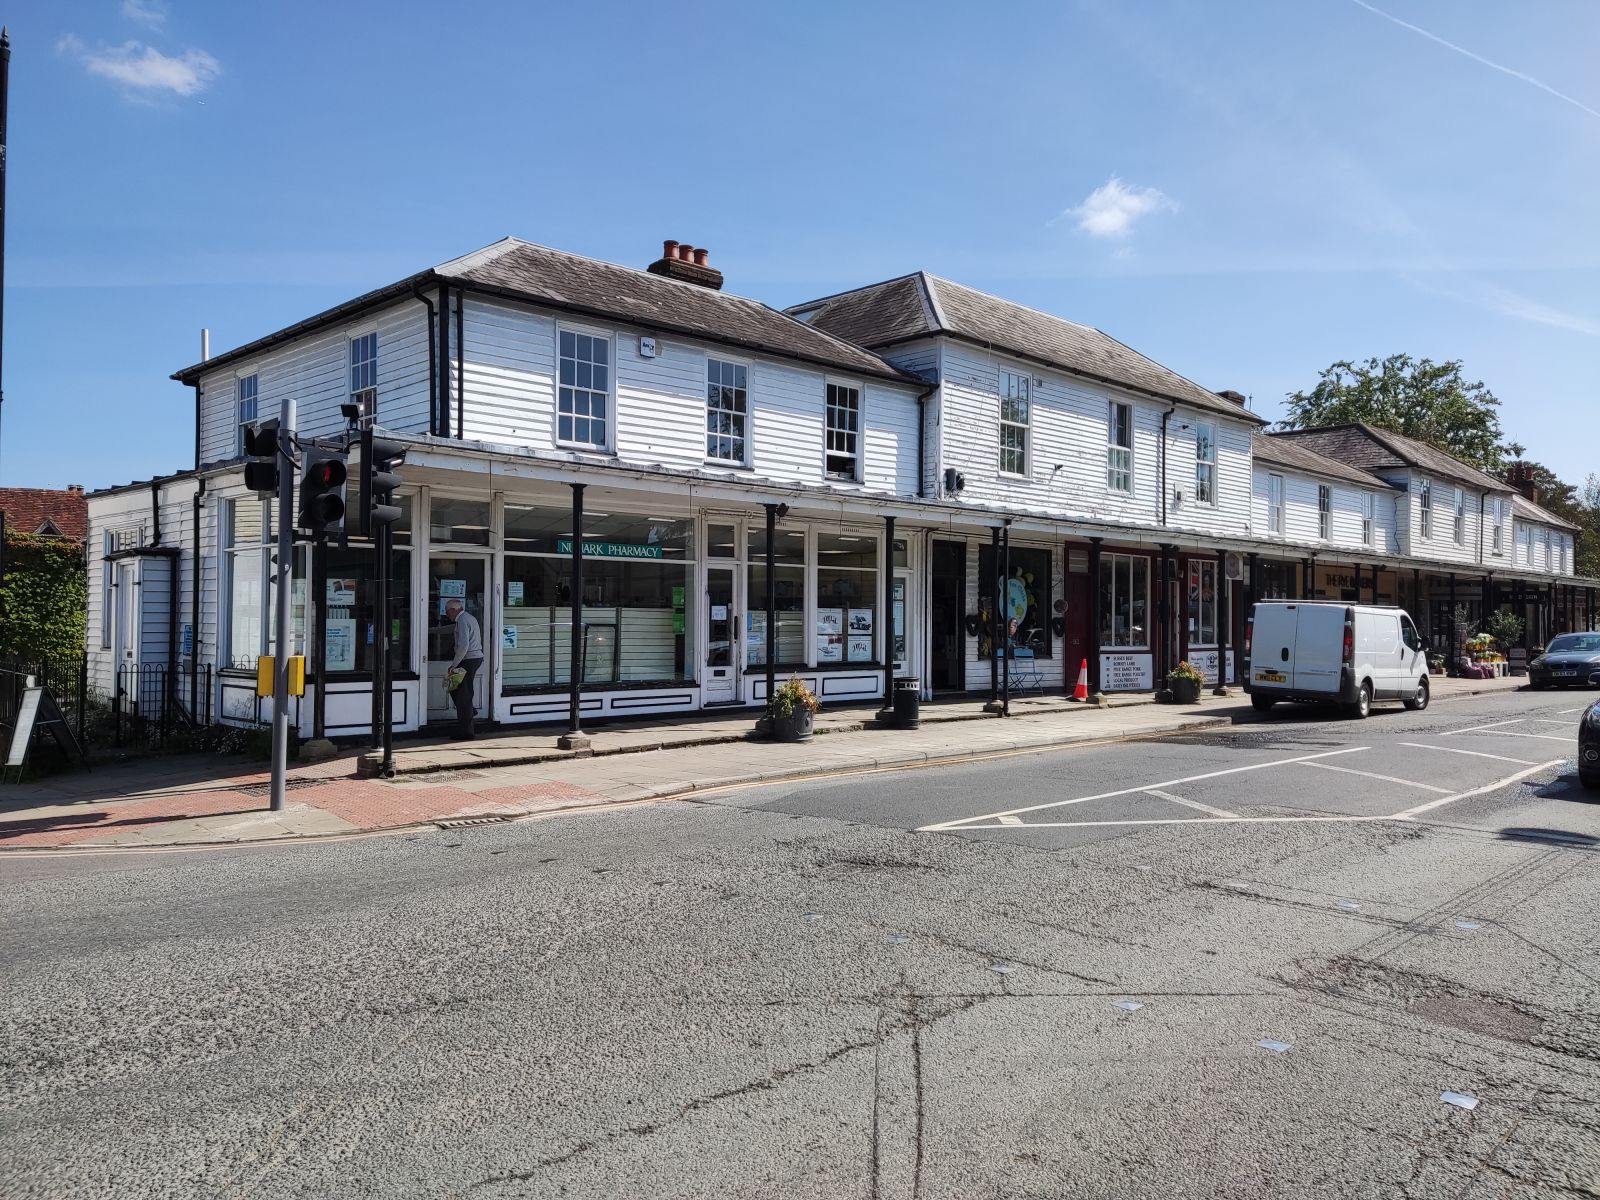 View of Hawkhurst colonnade of shops